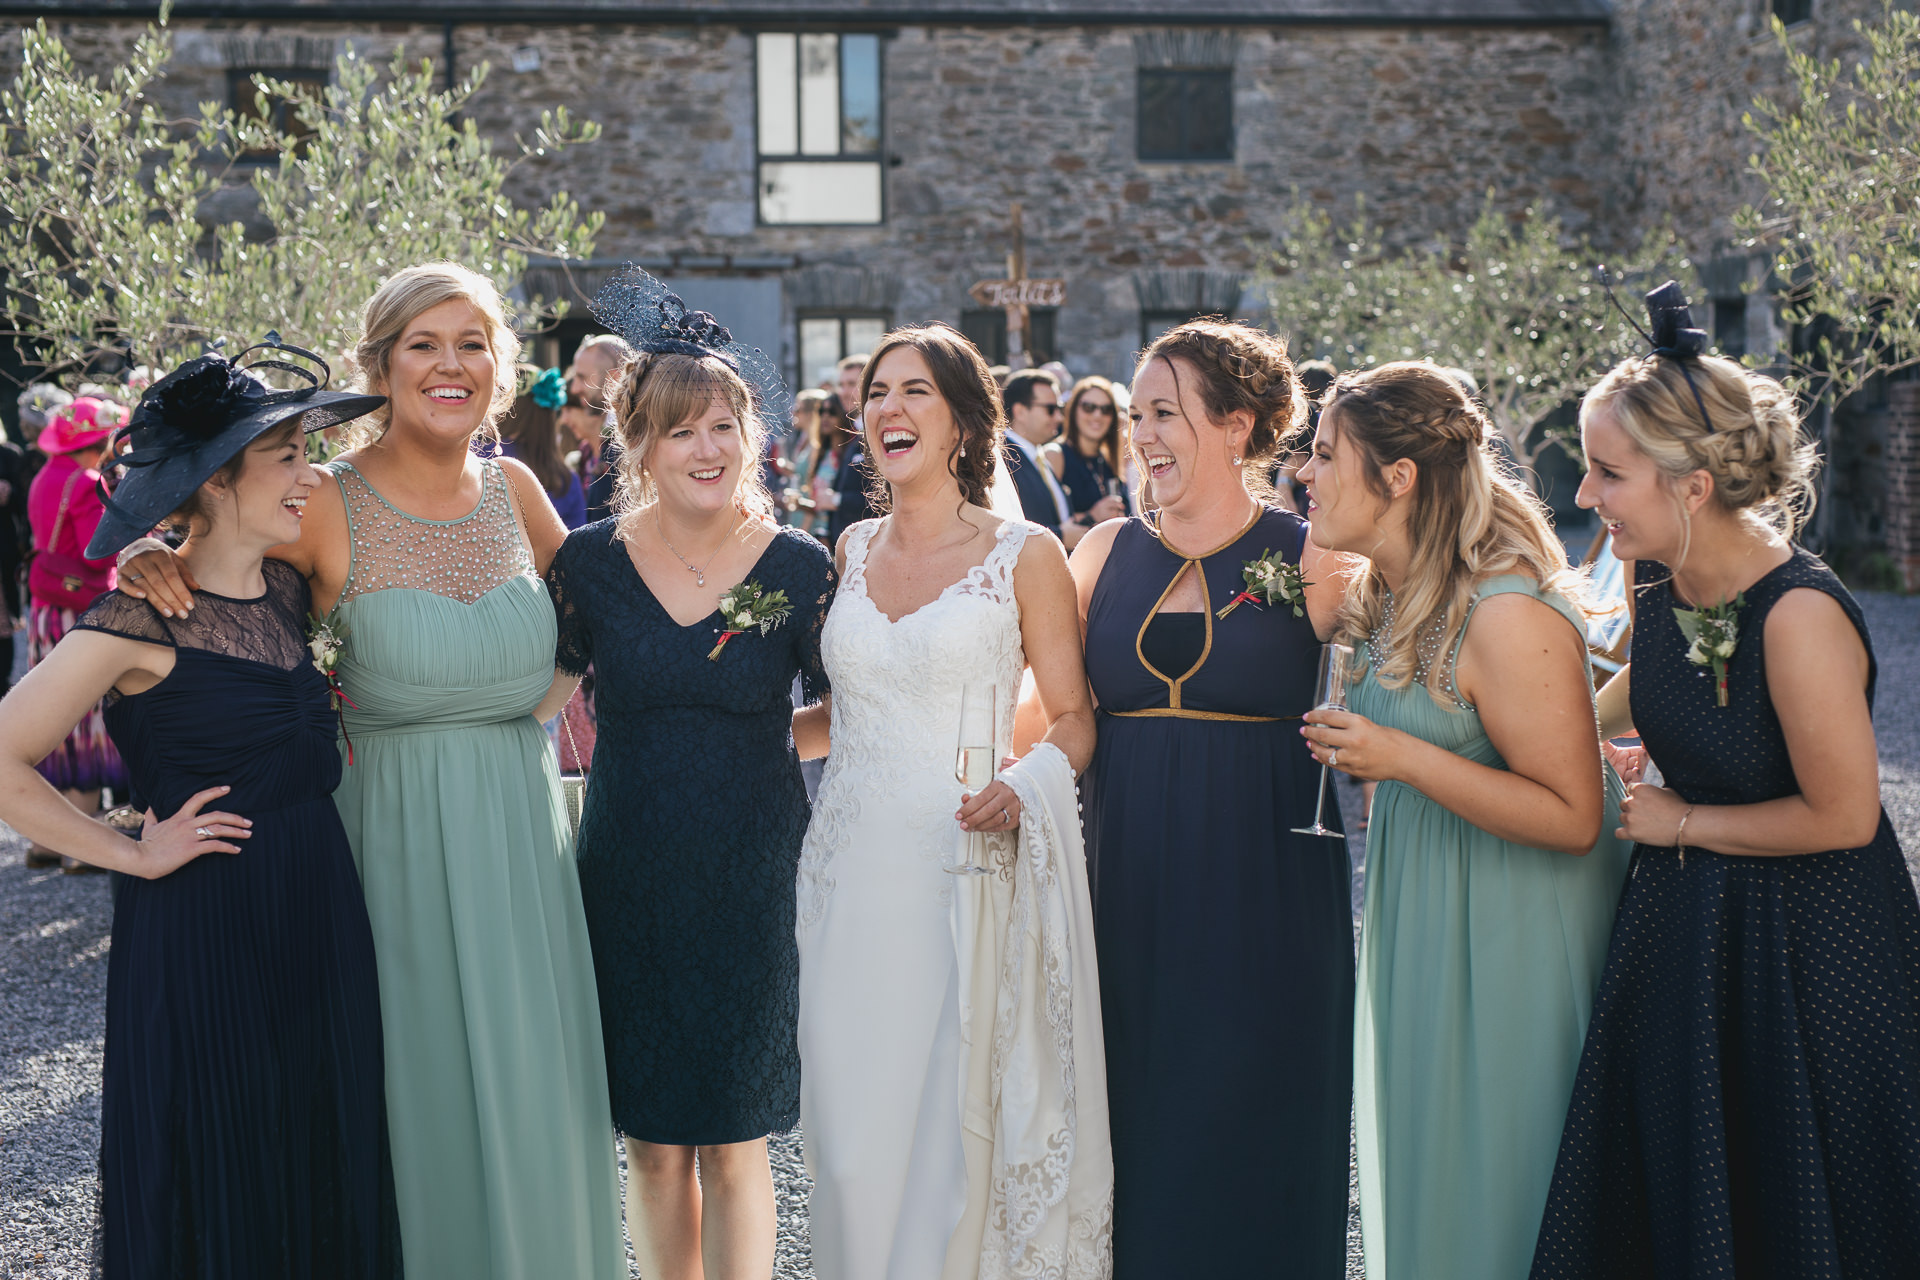 Bride with group of friends laughing together